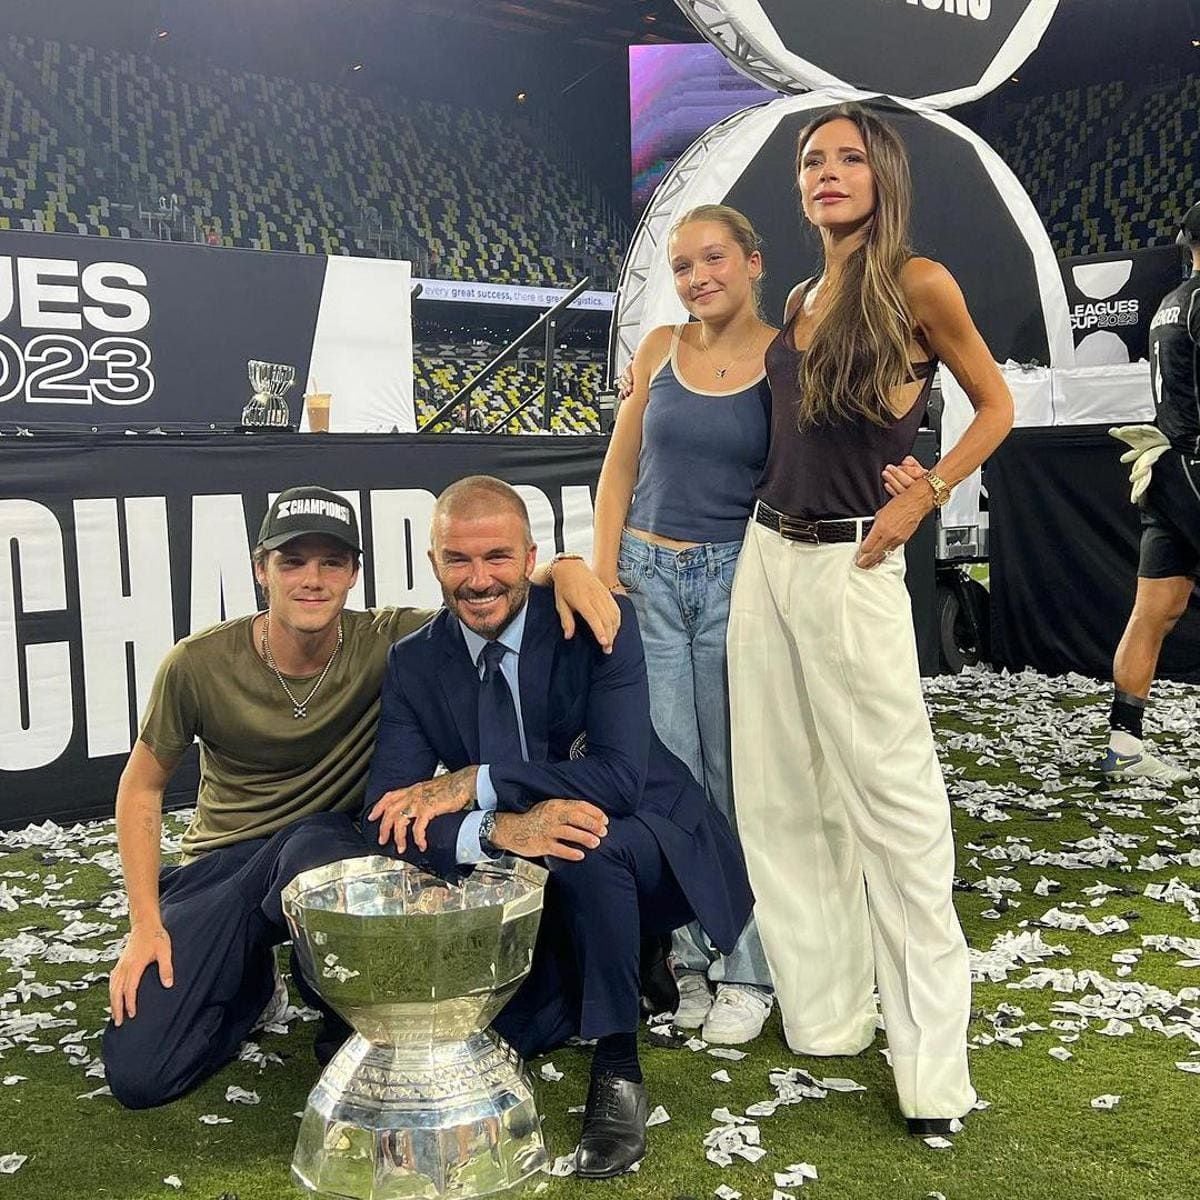 David Beckham celebrates winning title with his family, Reese Witherspoon and Nicole Kidman